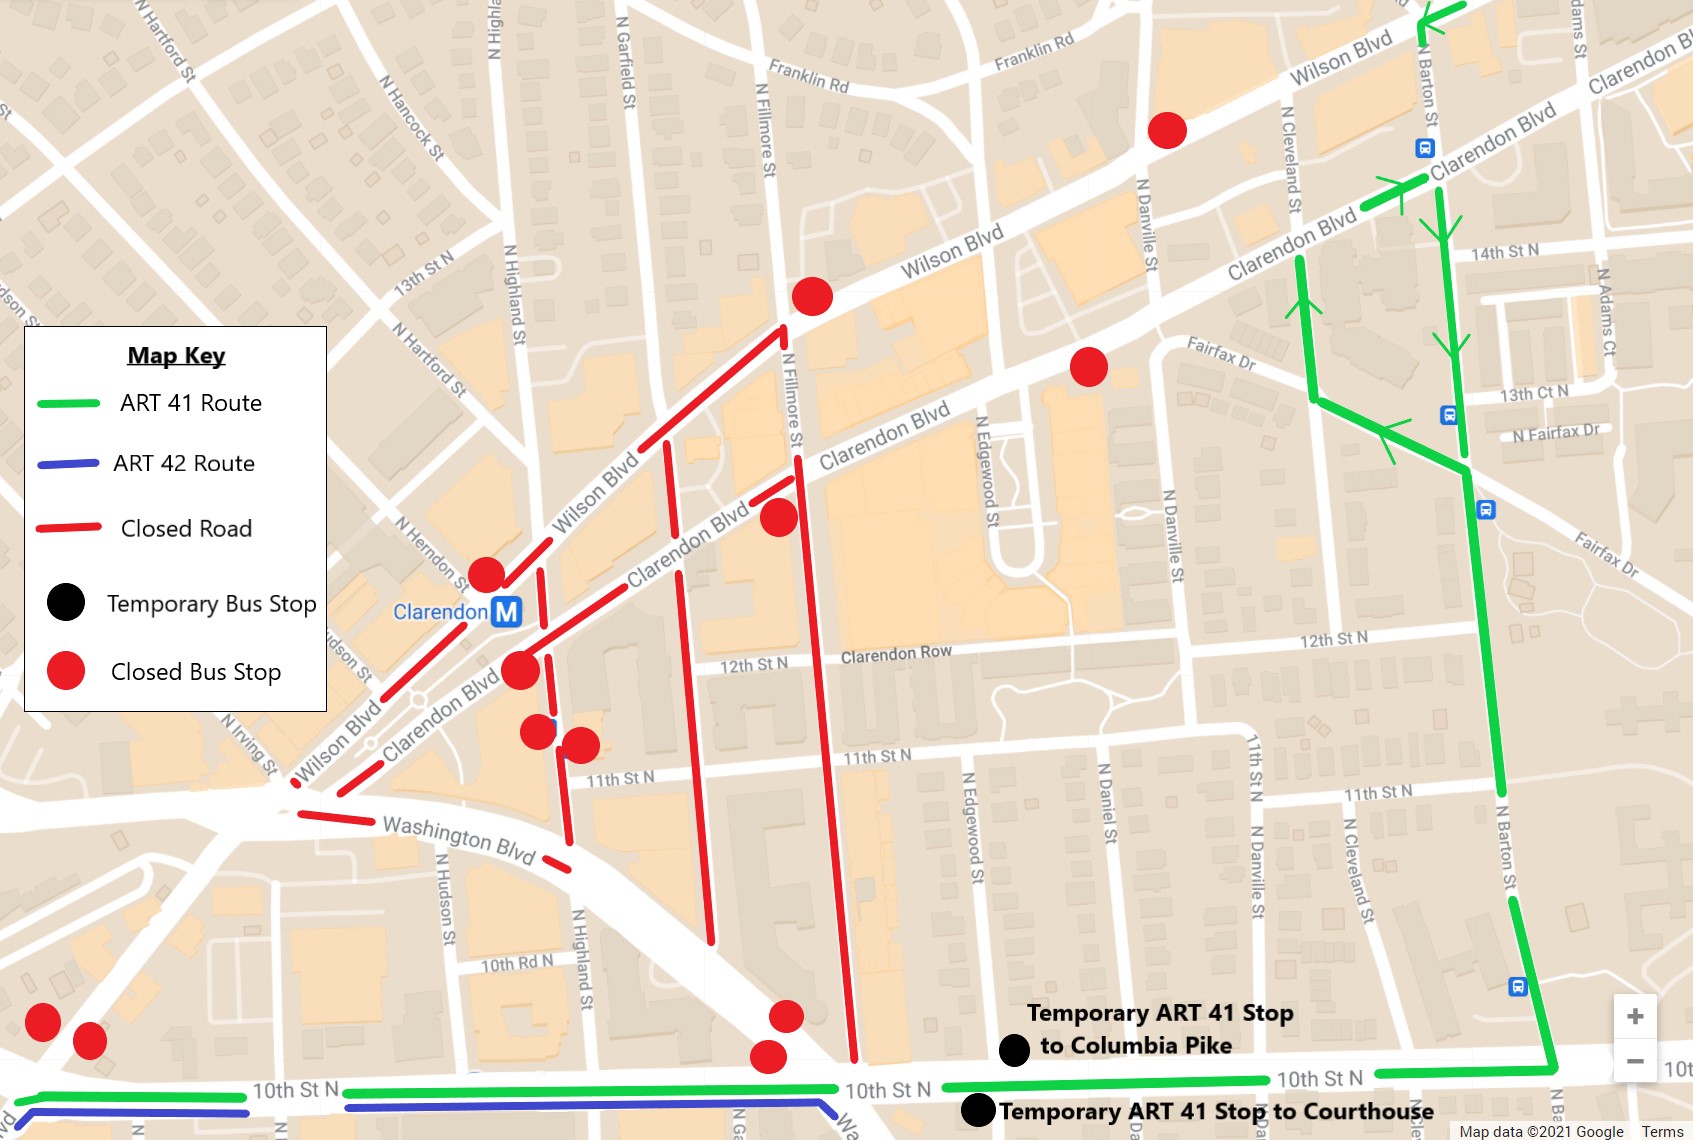 Map of Clarendon showing ART 41 & 42 detours and closed bus stops